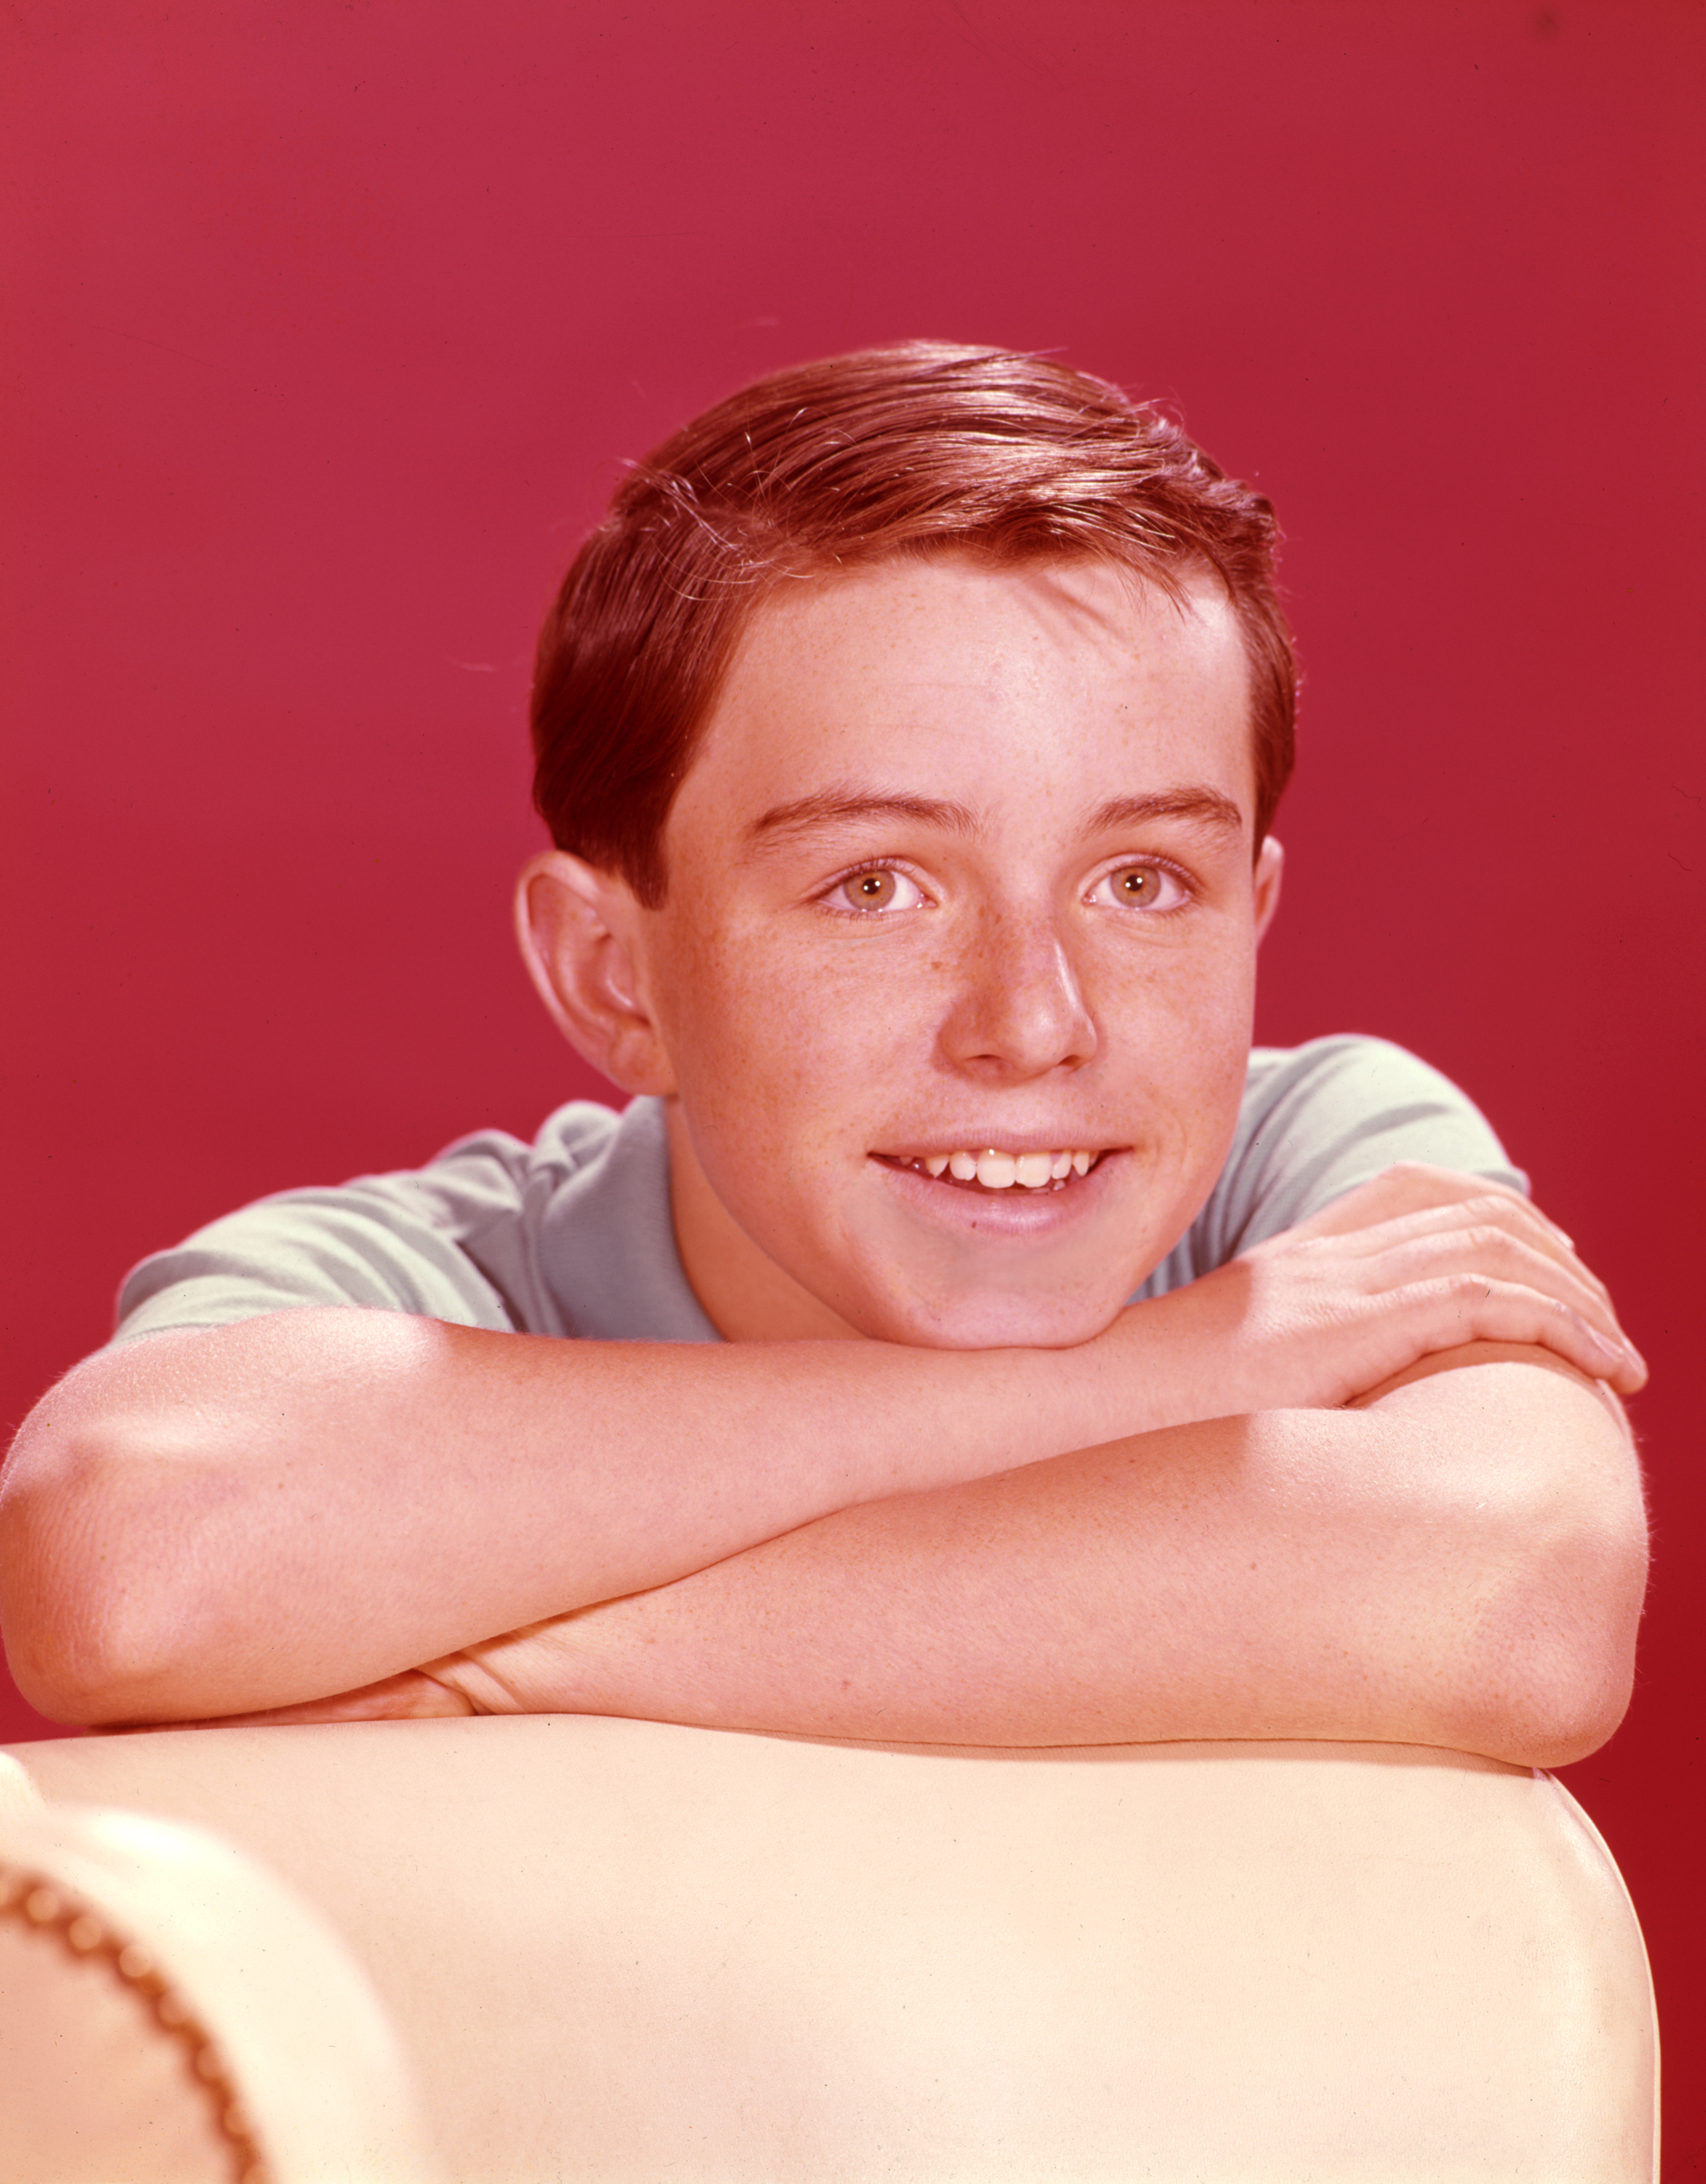 Jerry Mathers as Beaver in ABC's "Leave It To Beaver" | Source: Getty Images